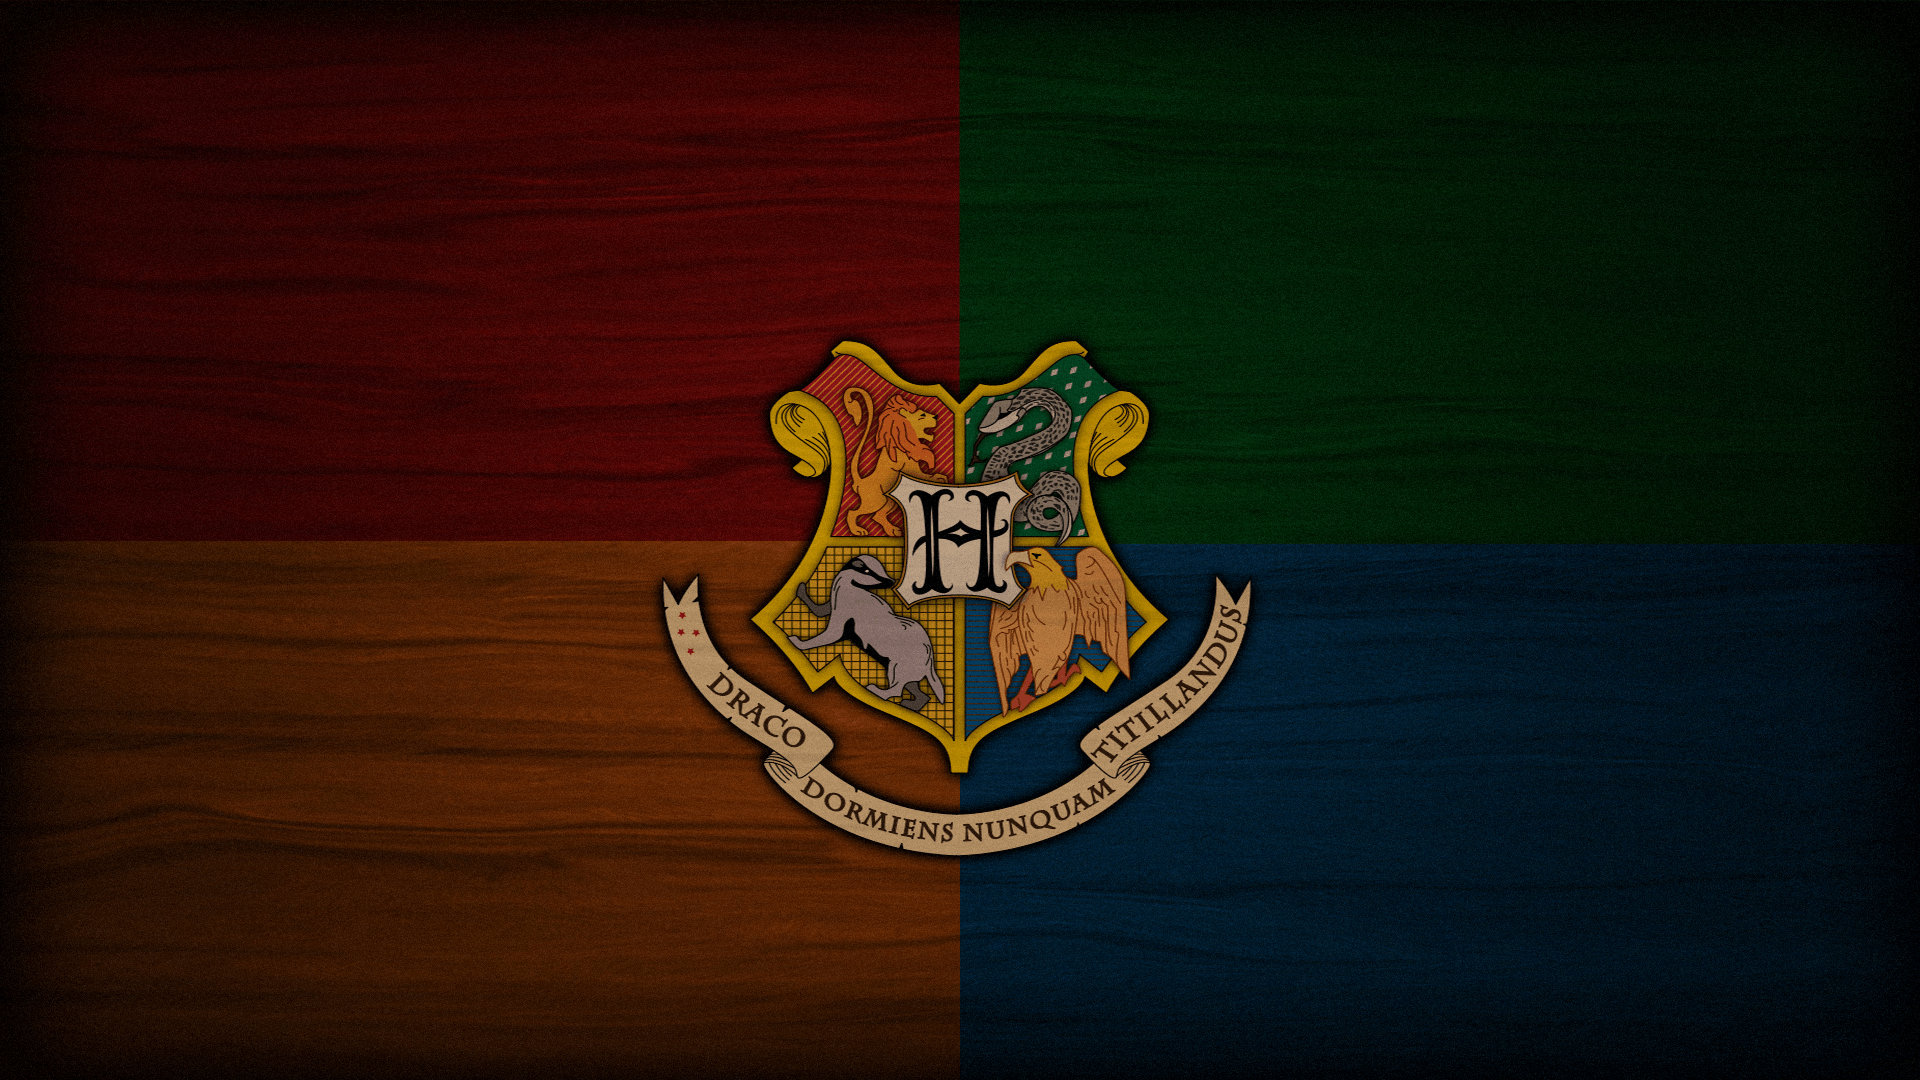 Ravenclaw iPhone Wallpaper, image collections of wallpaper